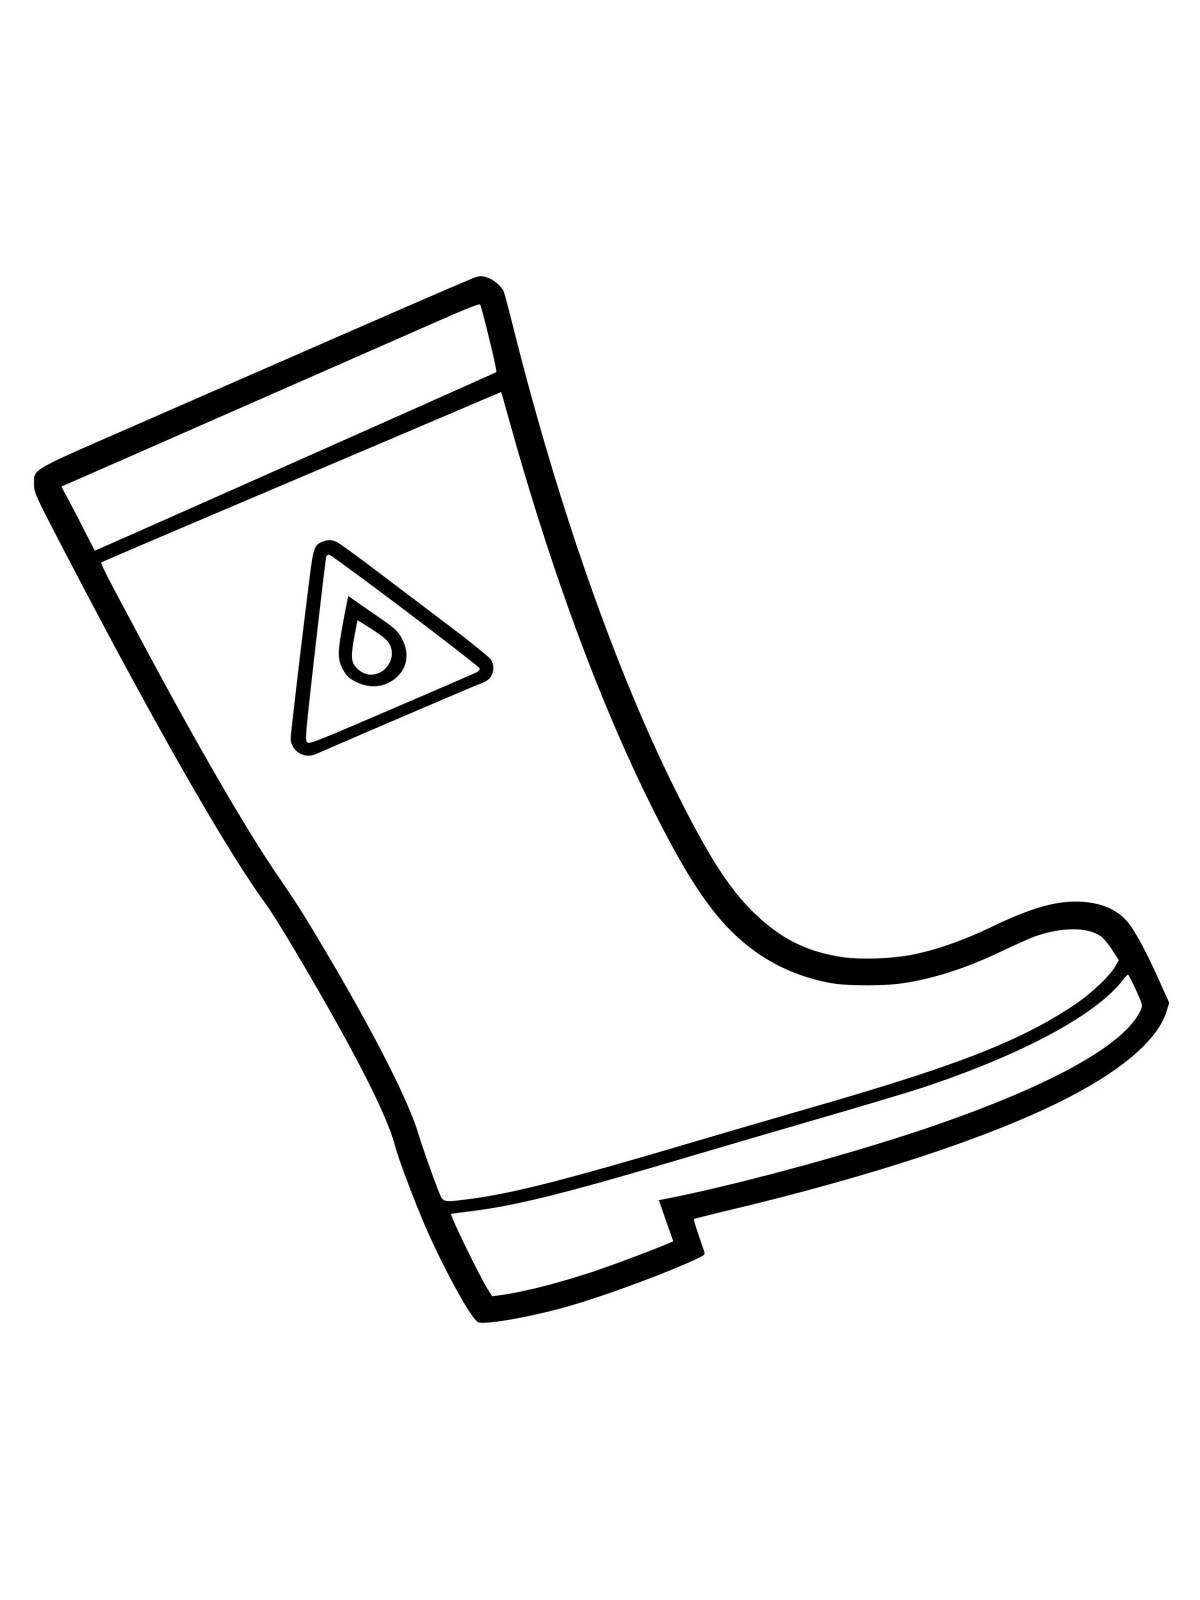 Coloring page amazing rubber boots